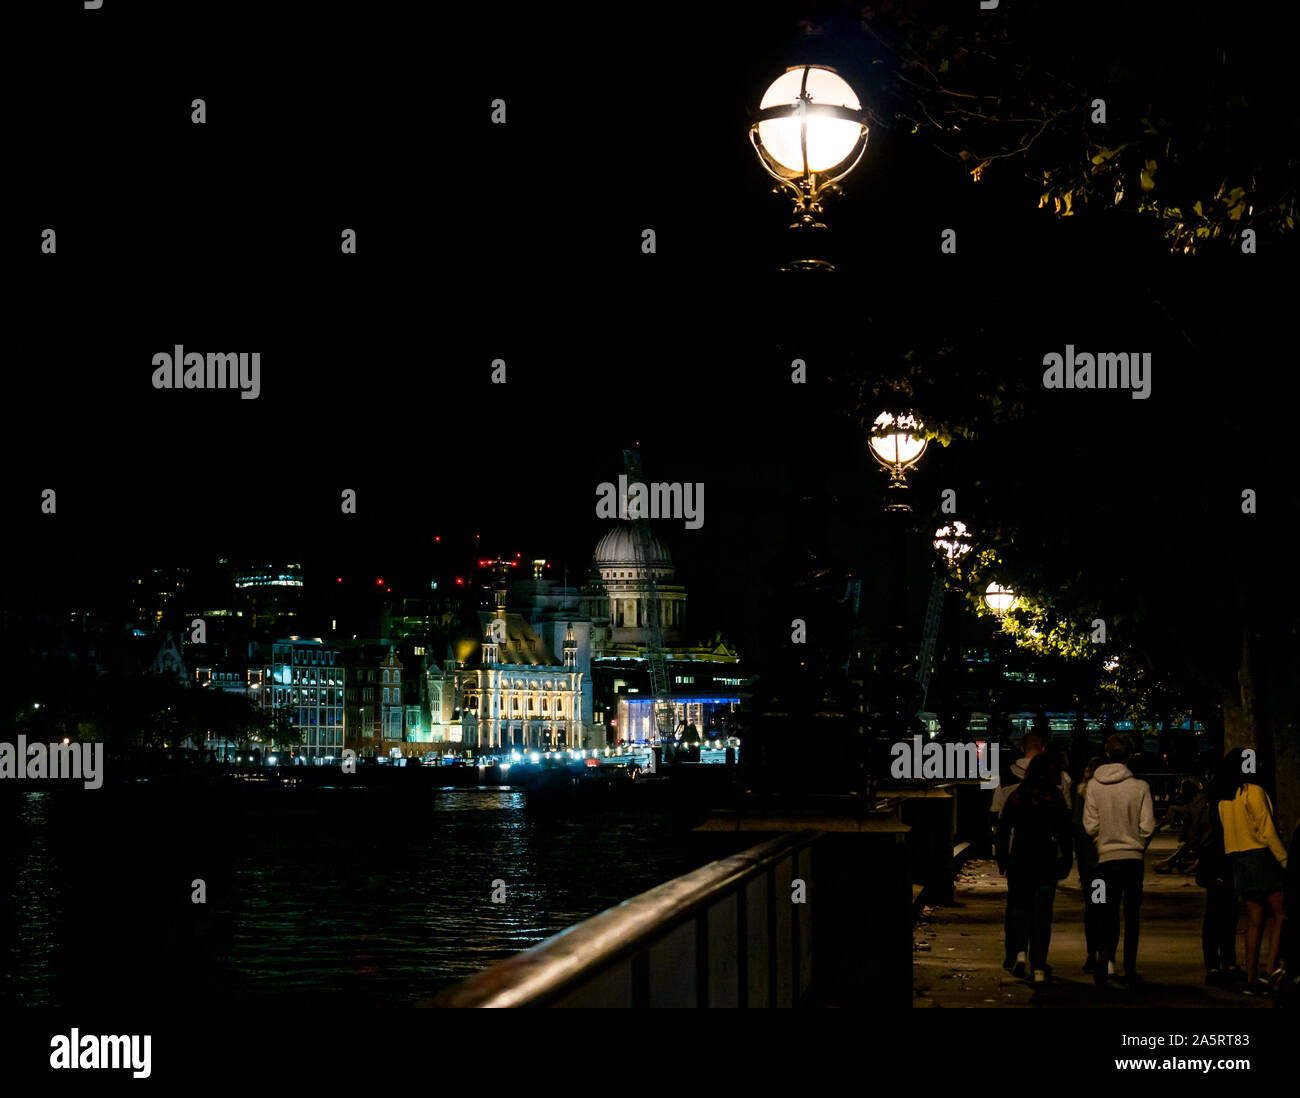 Ornate streetlights along Thames River at night with view of St Paul's Cathedral, London, England, UK Stock Photo